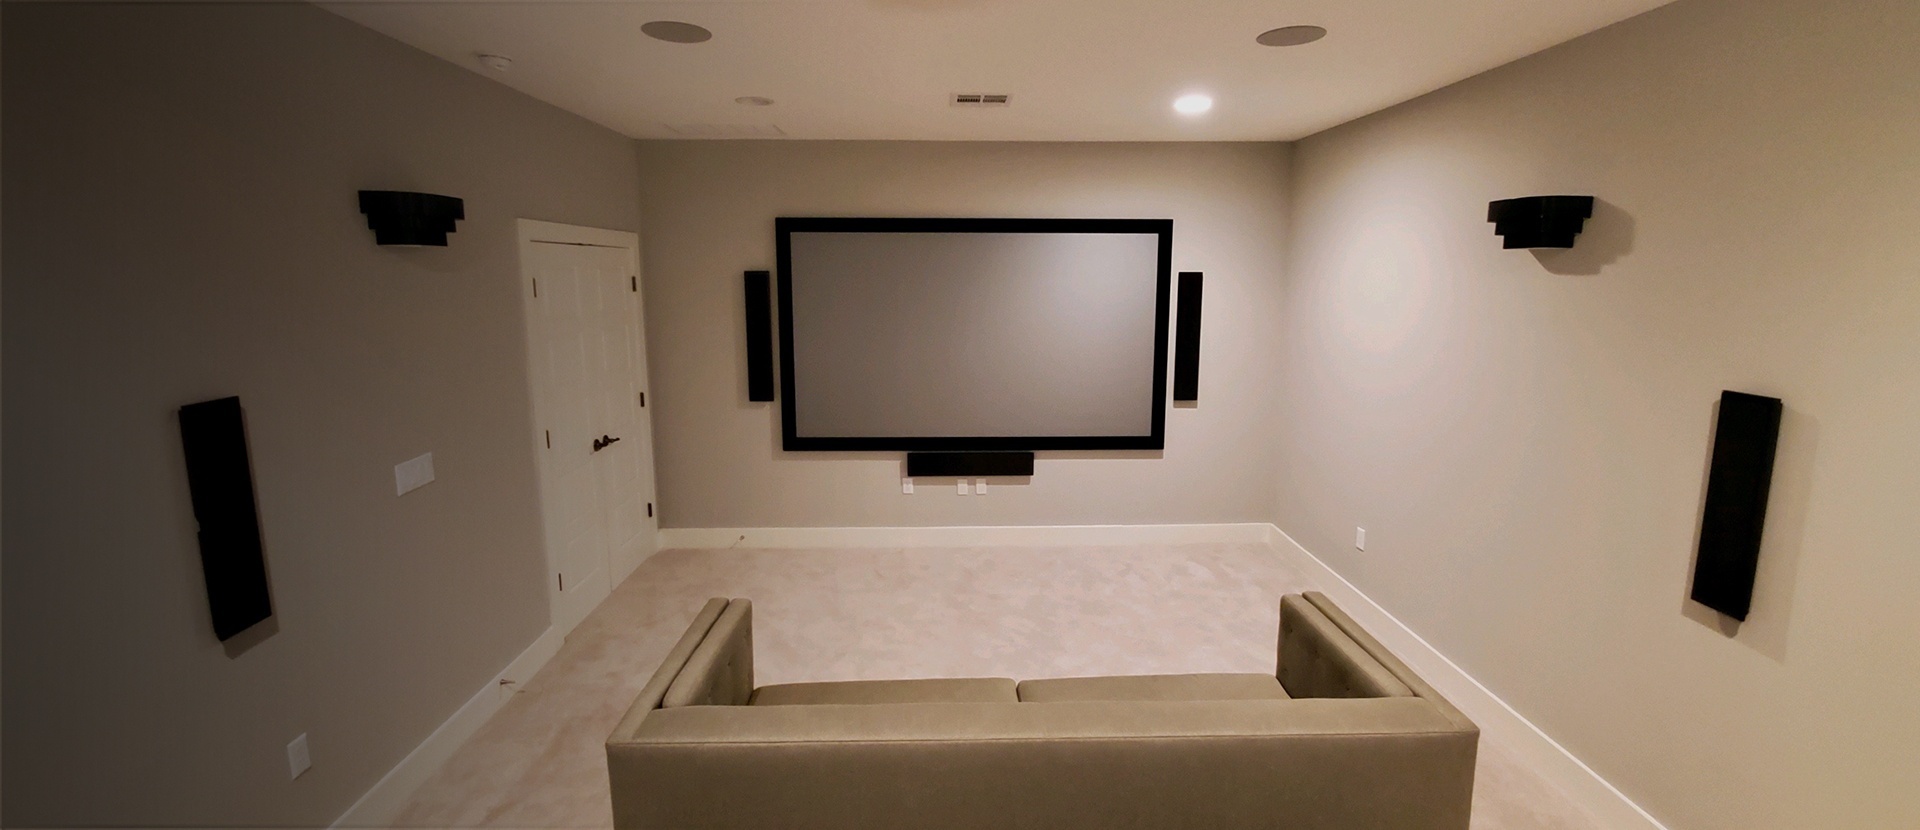 Elevate your Home Entertainment Experience with AV Connect - Smart Home Automation Company in Austin